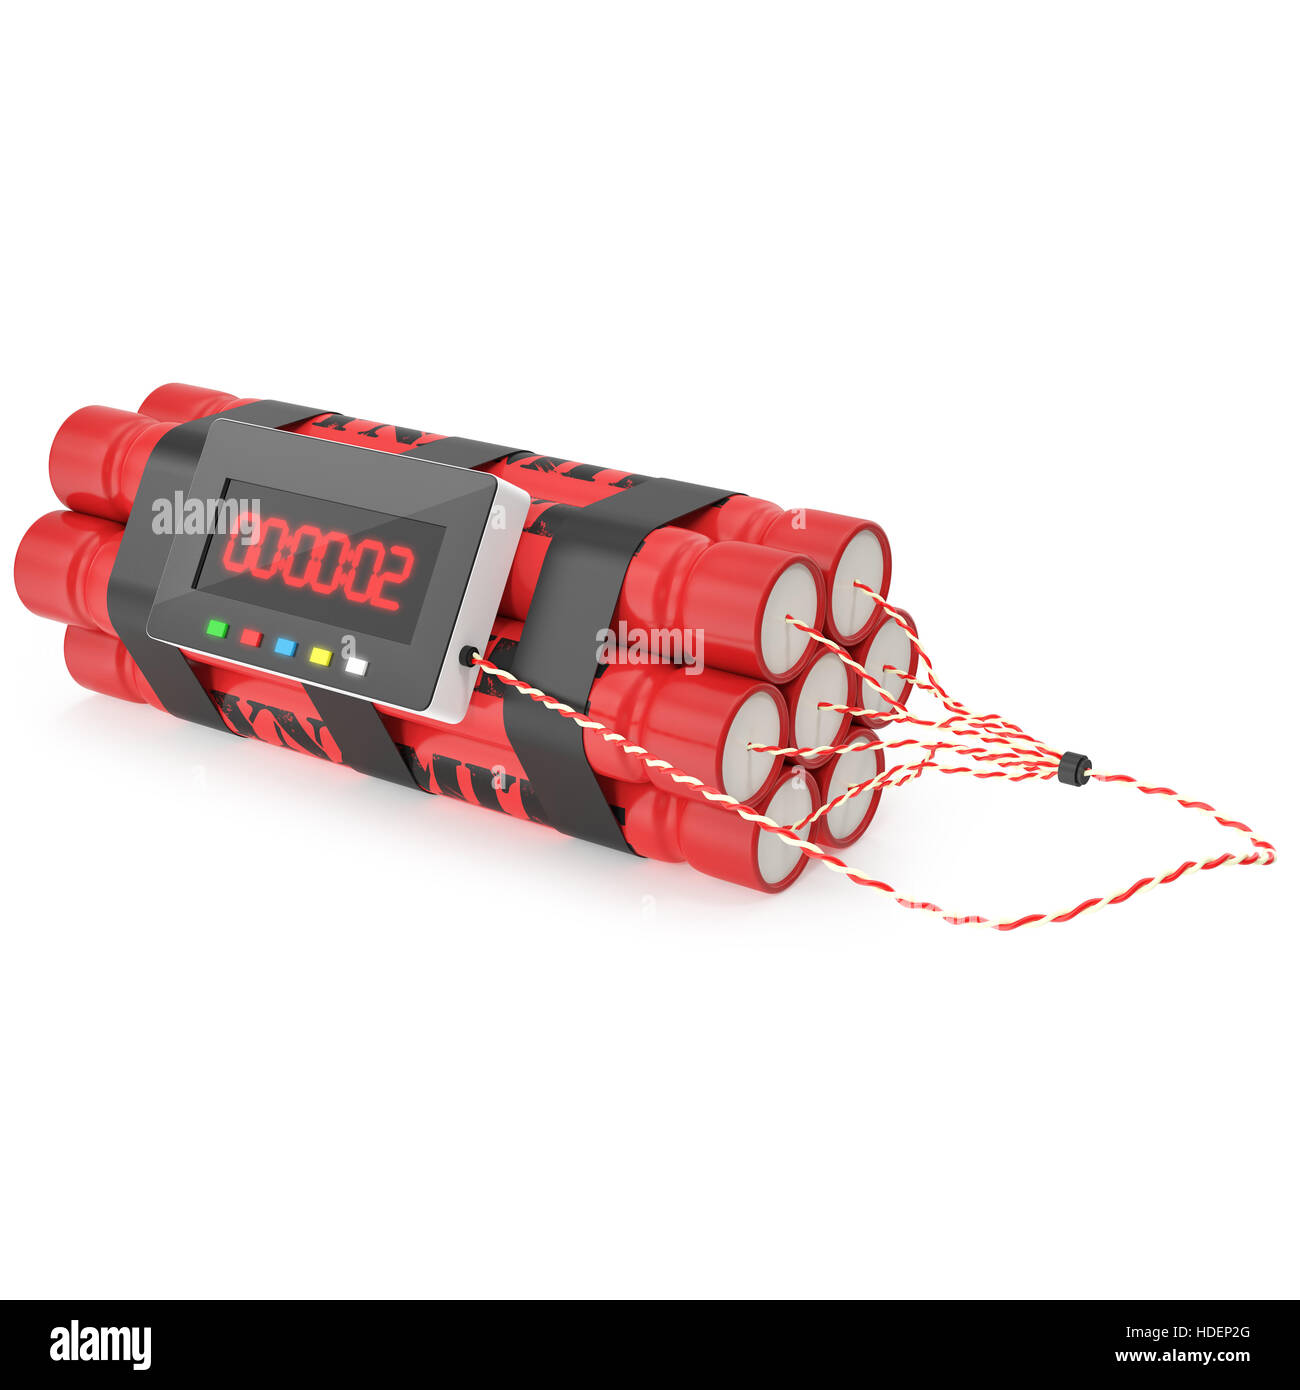 TNT dynamite red bomb with a timer isolated on a white background. Stock Photo